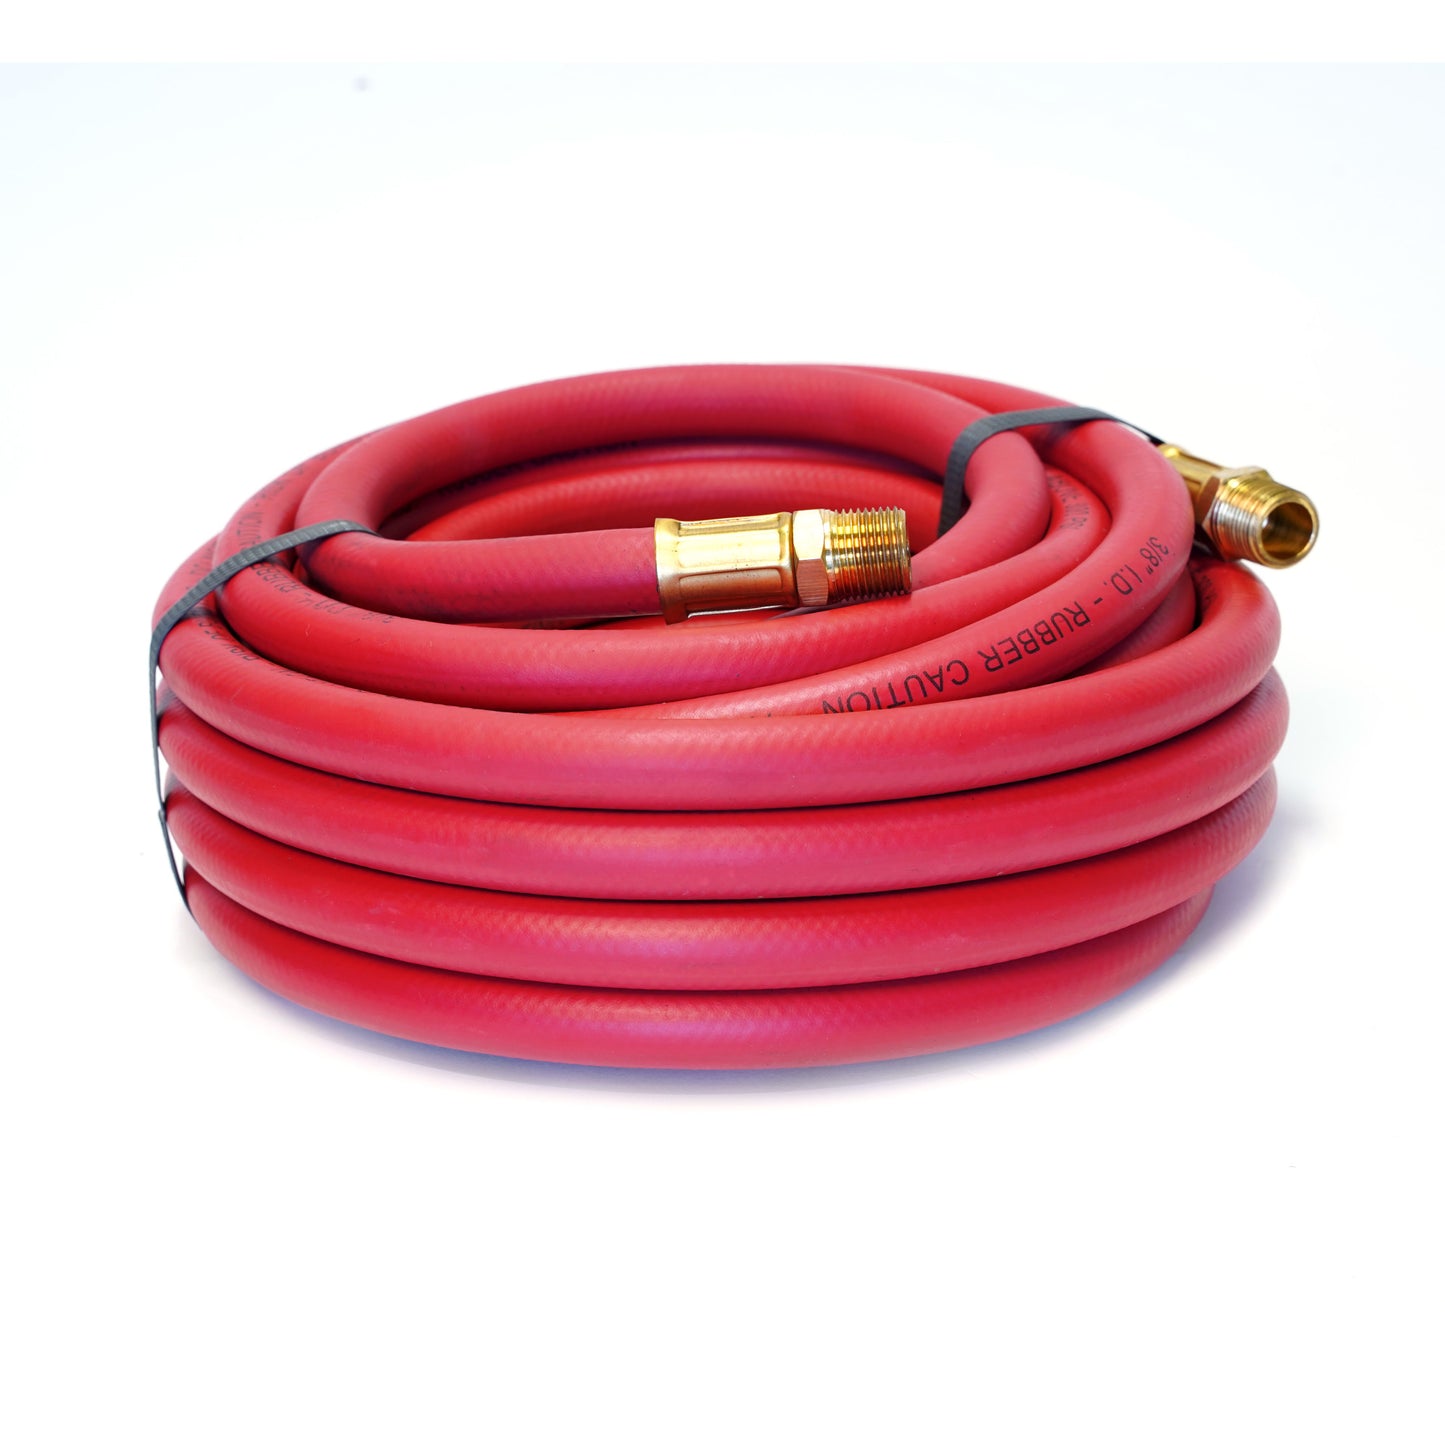 30-Foot Rubber 3/8-Inch ID Air Hose with 3/8-Inch NPT Brass Fittings